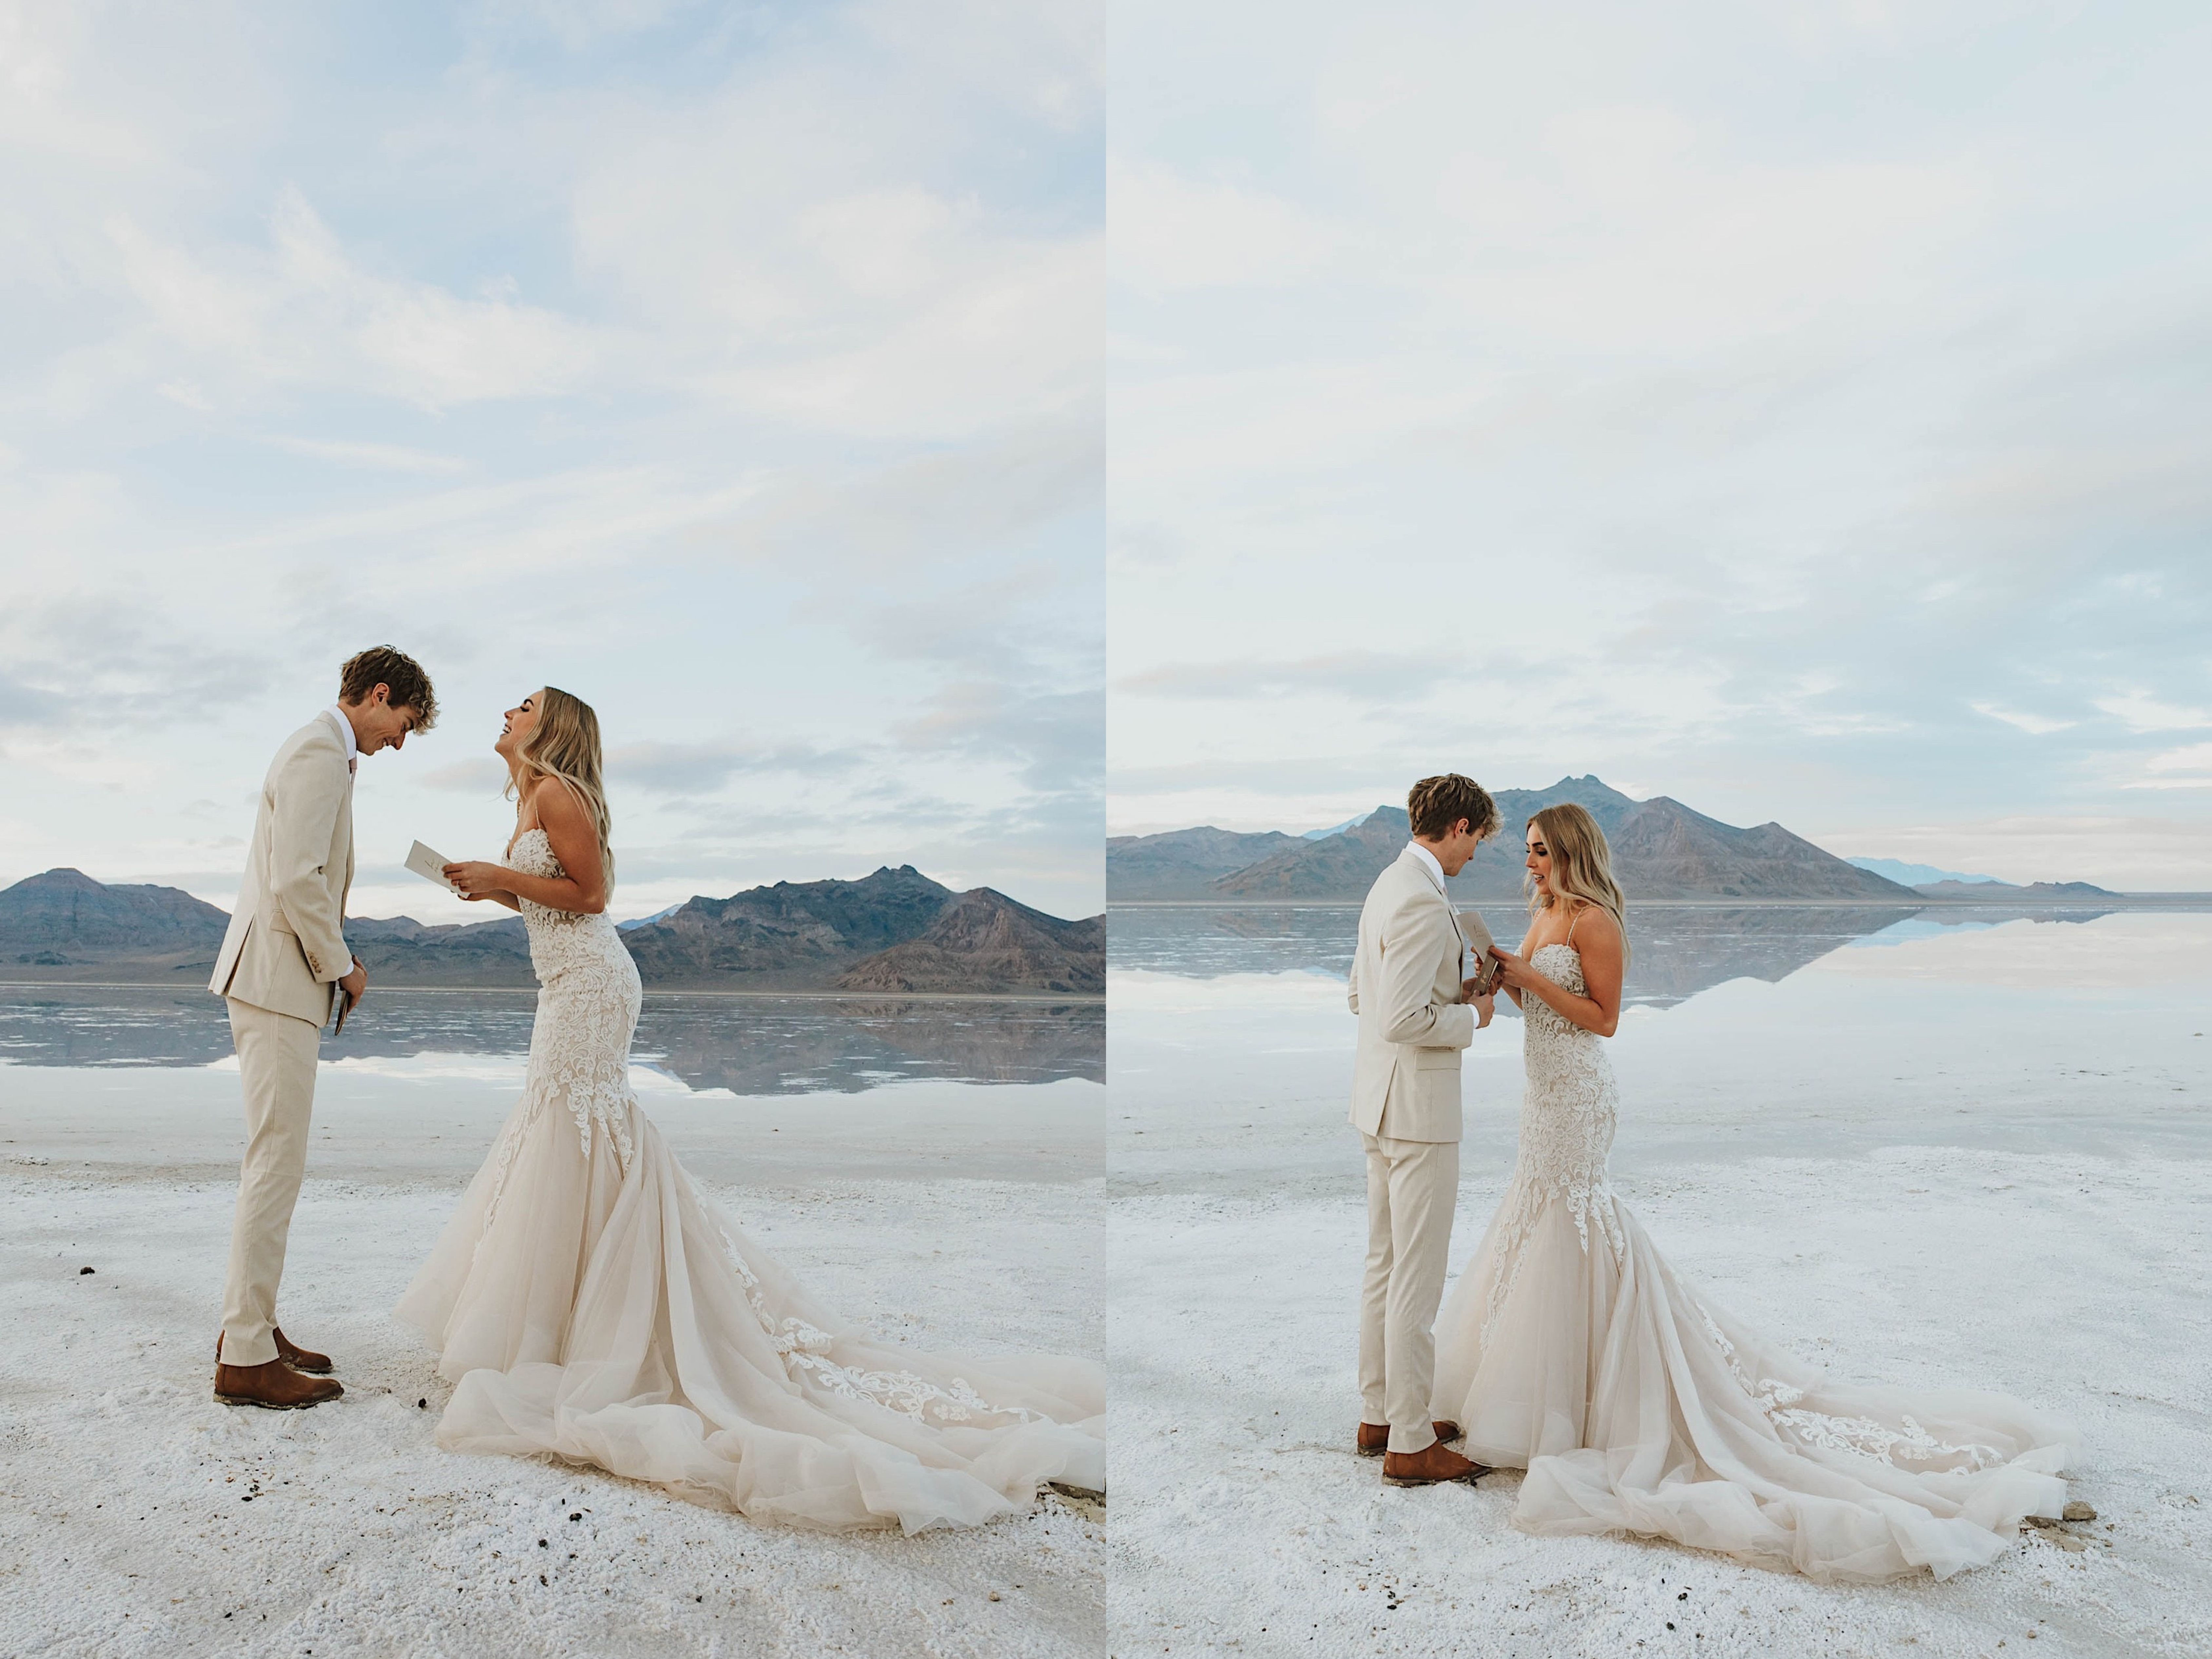 2 photos side by side of a bride and groom in the Utah Salt Flats reading their wedding vows to one another